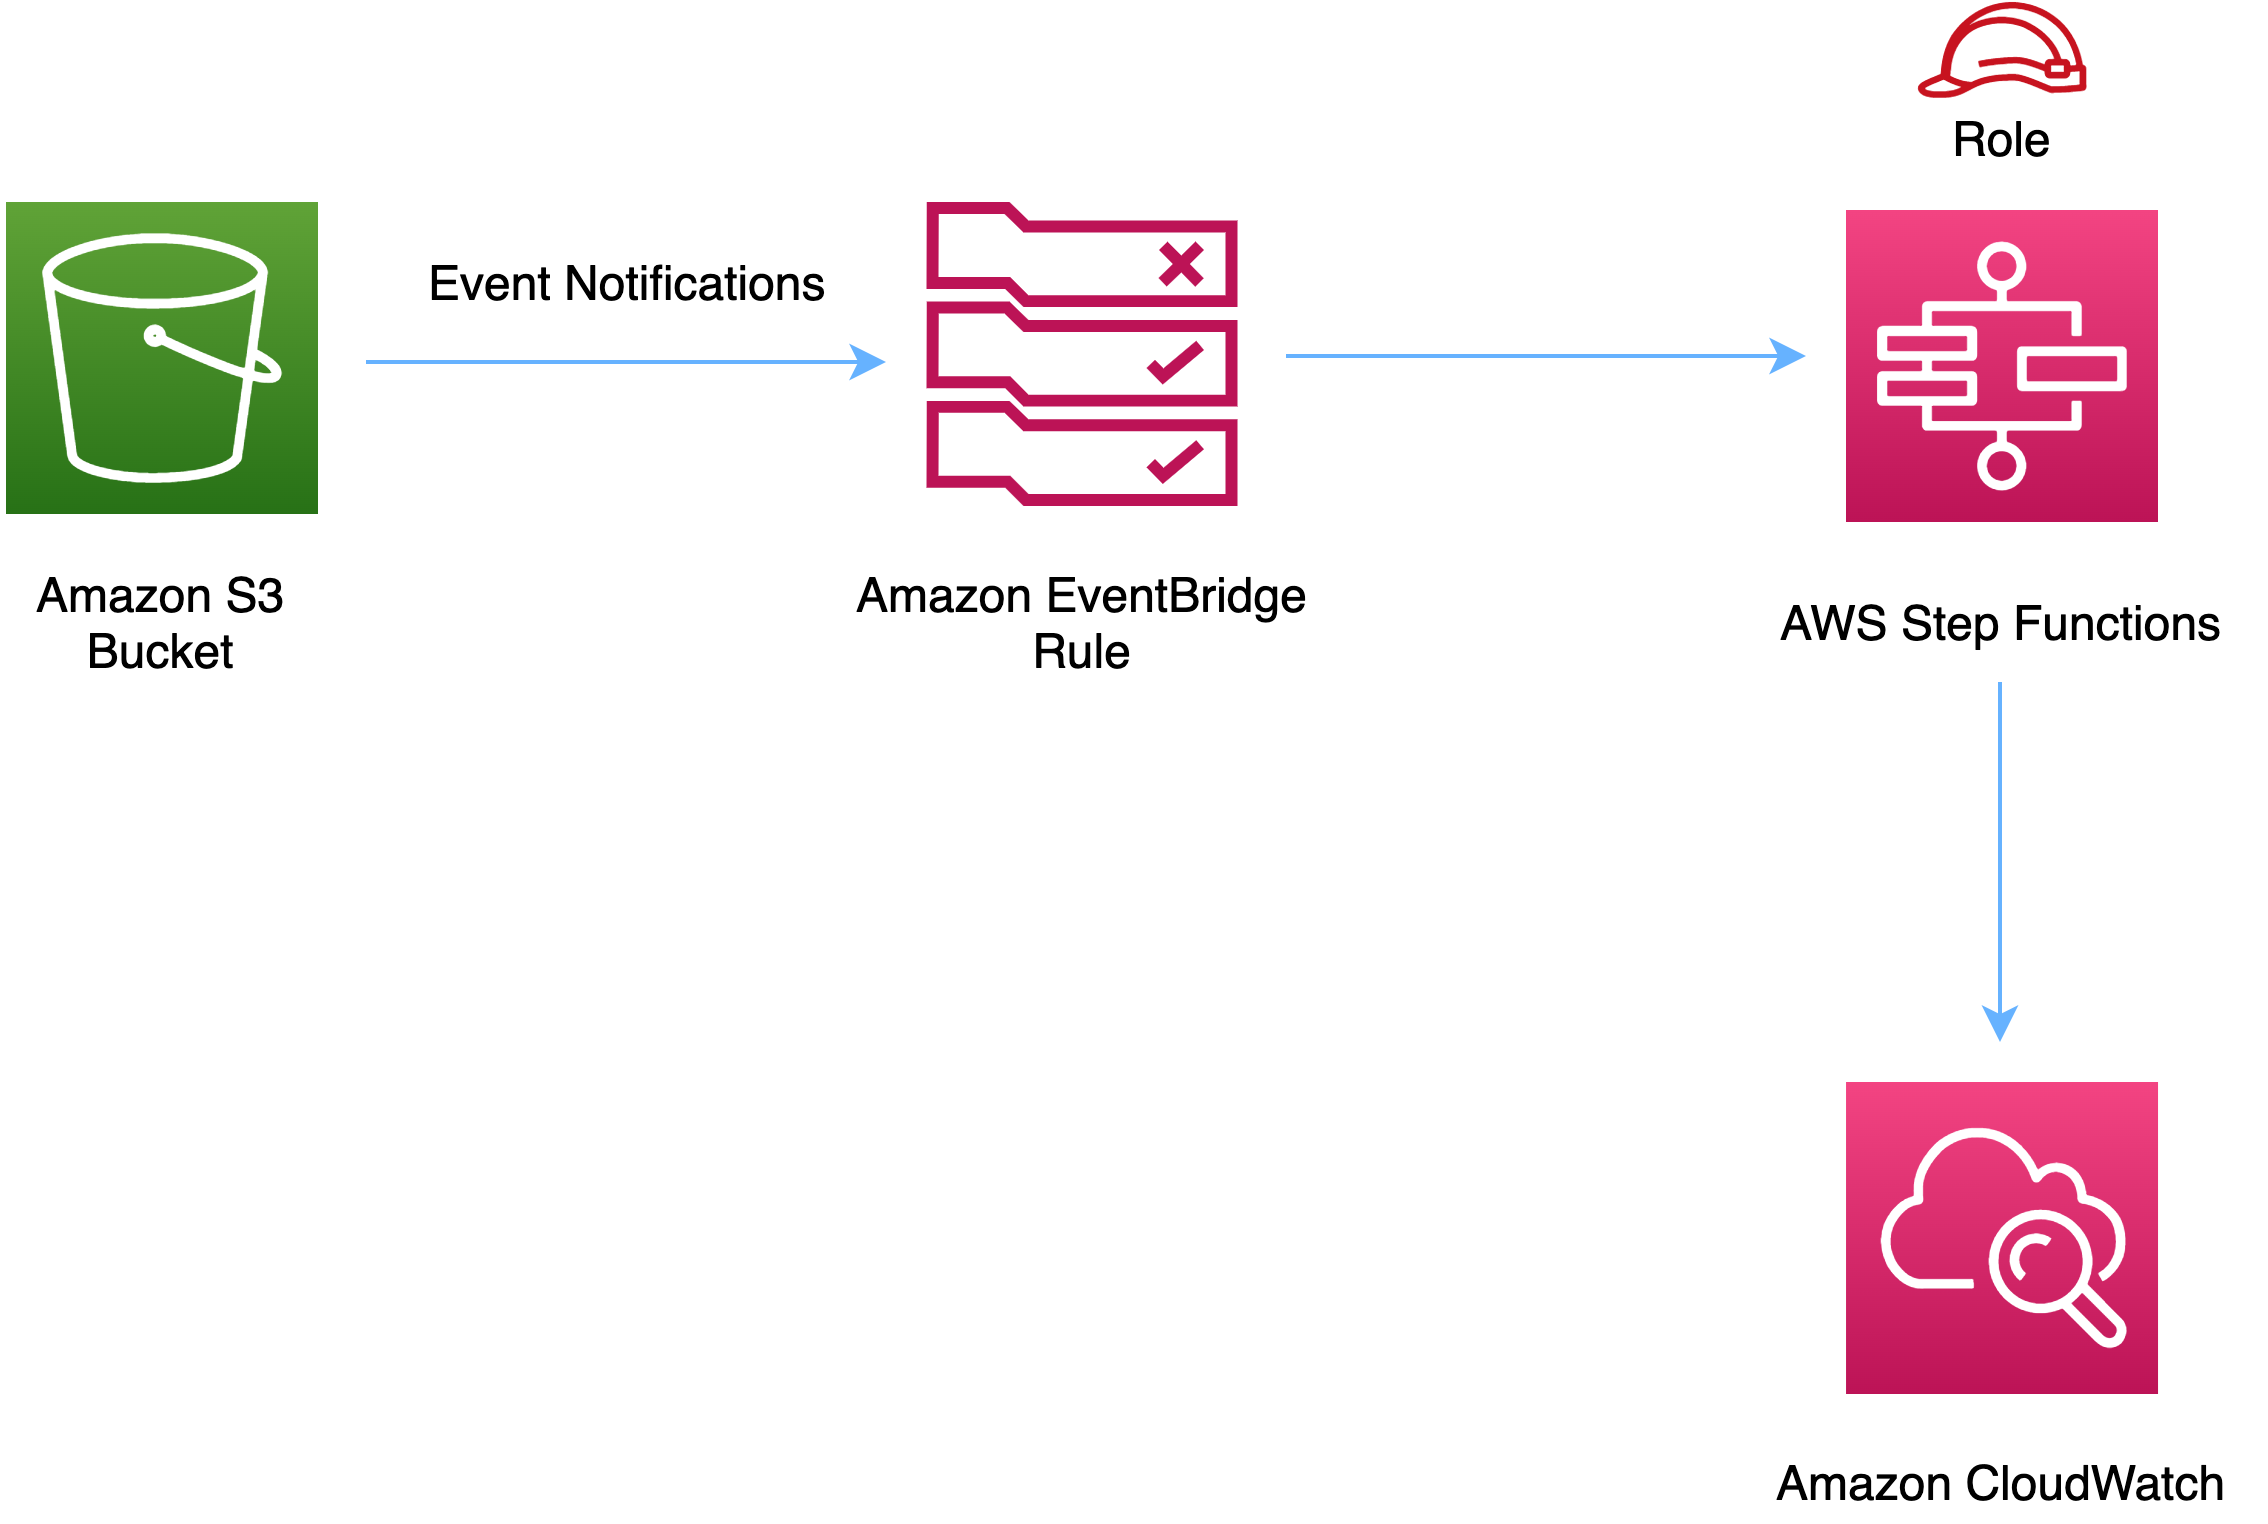 https://docs.aws.amazon.com/images/solutions/latest/constructs/images/aws-s3-stepfunctions.png